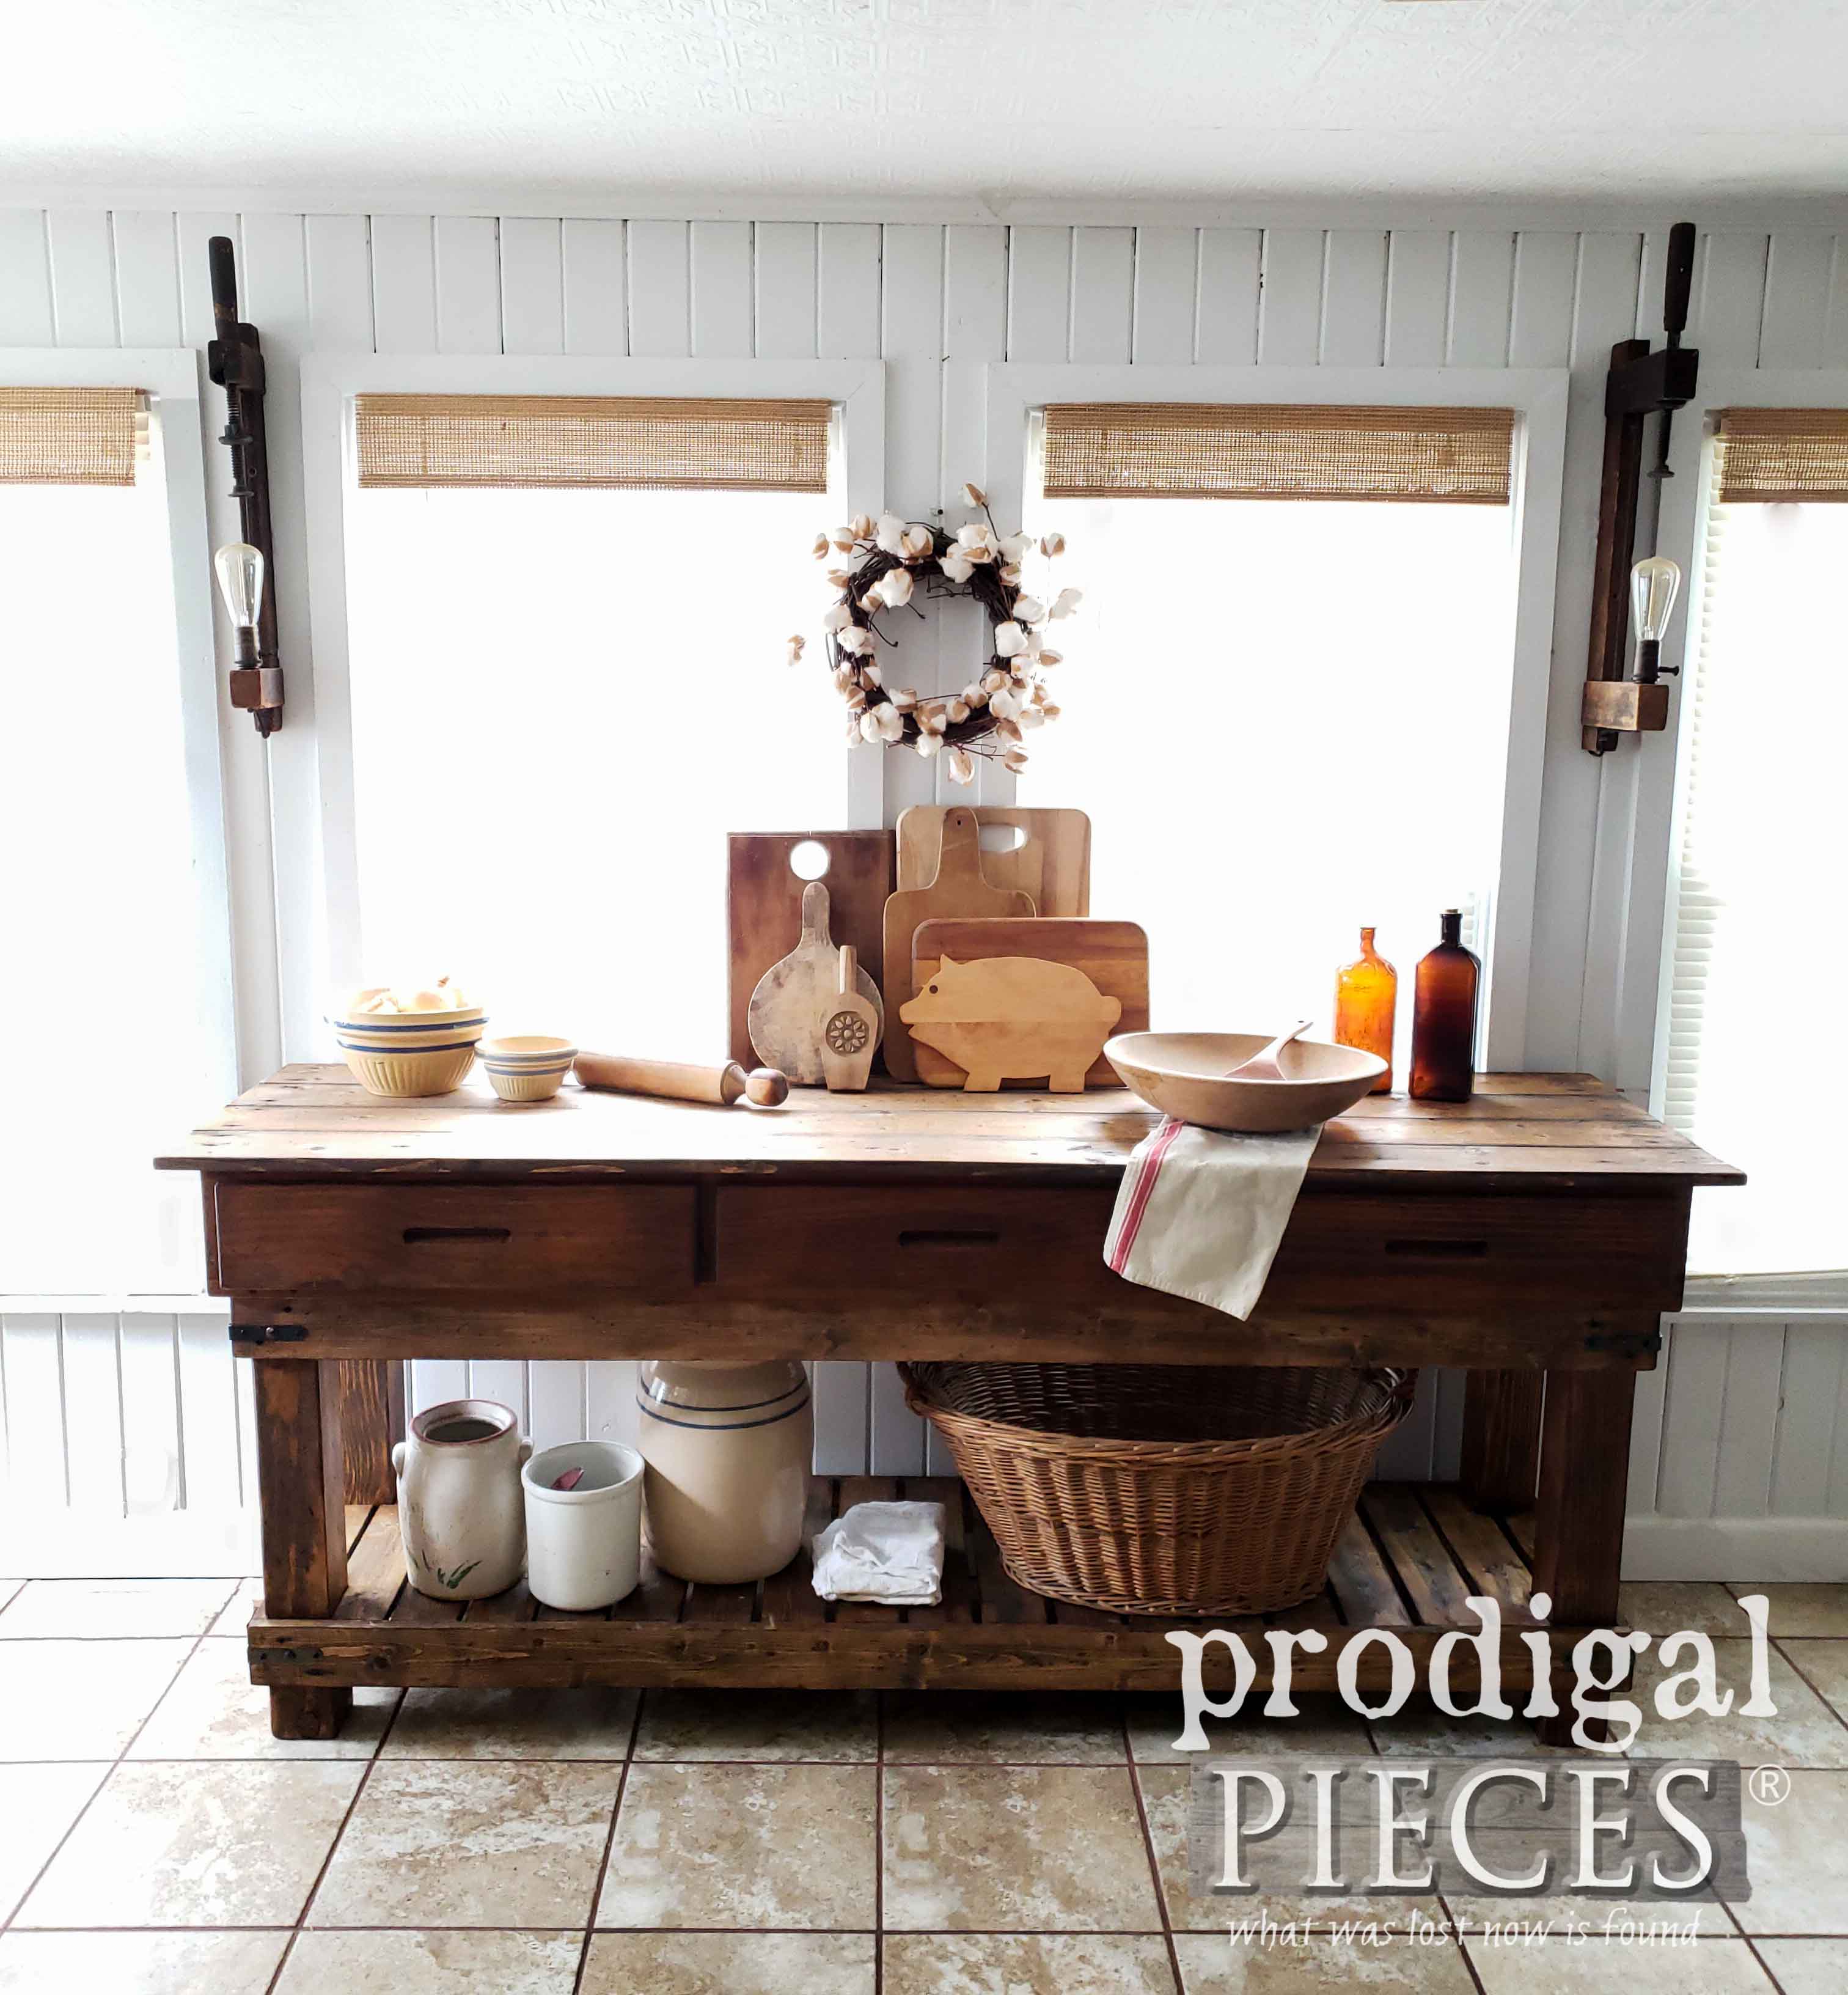 Fantastic Farmhouse Workbench for Kitchen, Entry, and Living Room created by Larissa of Prodigal Pieces | prodigalpieces.com